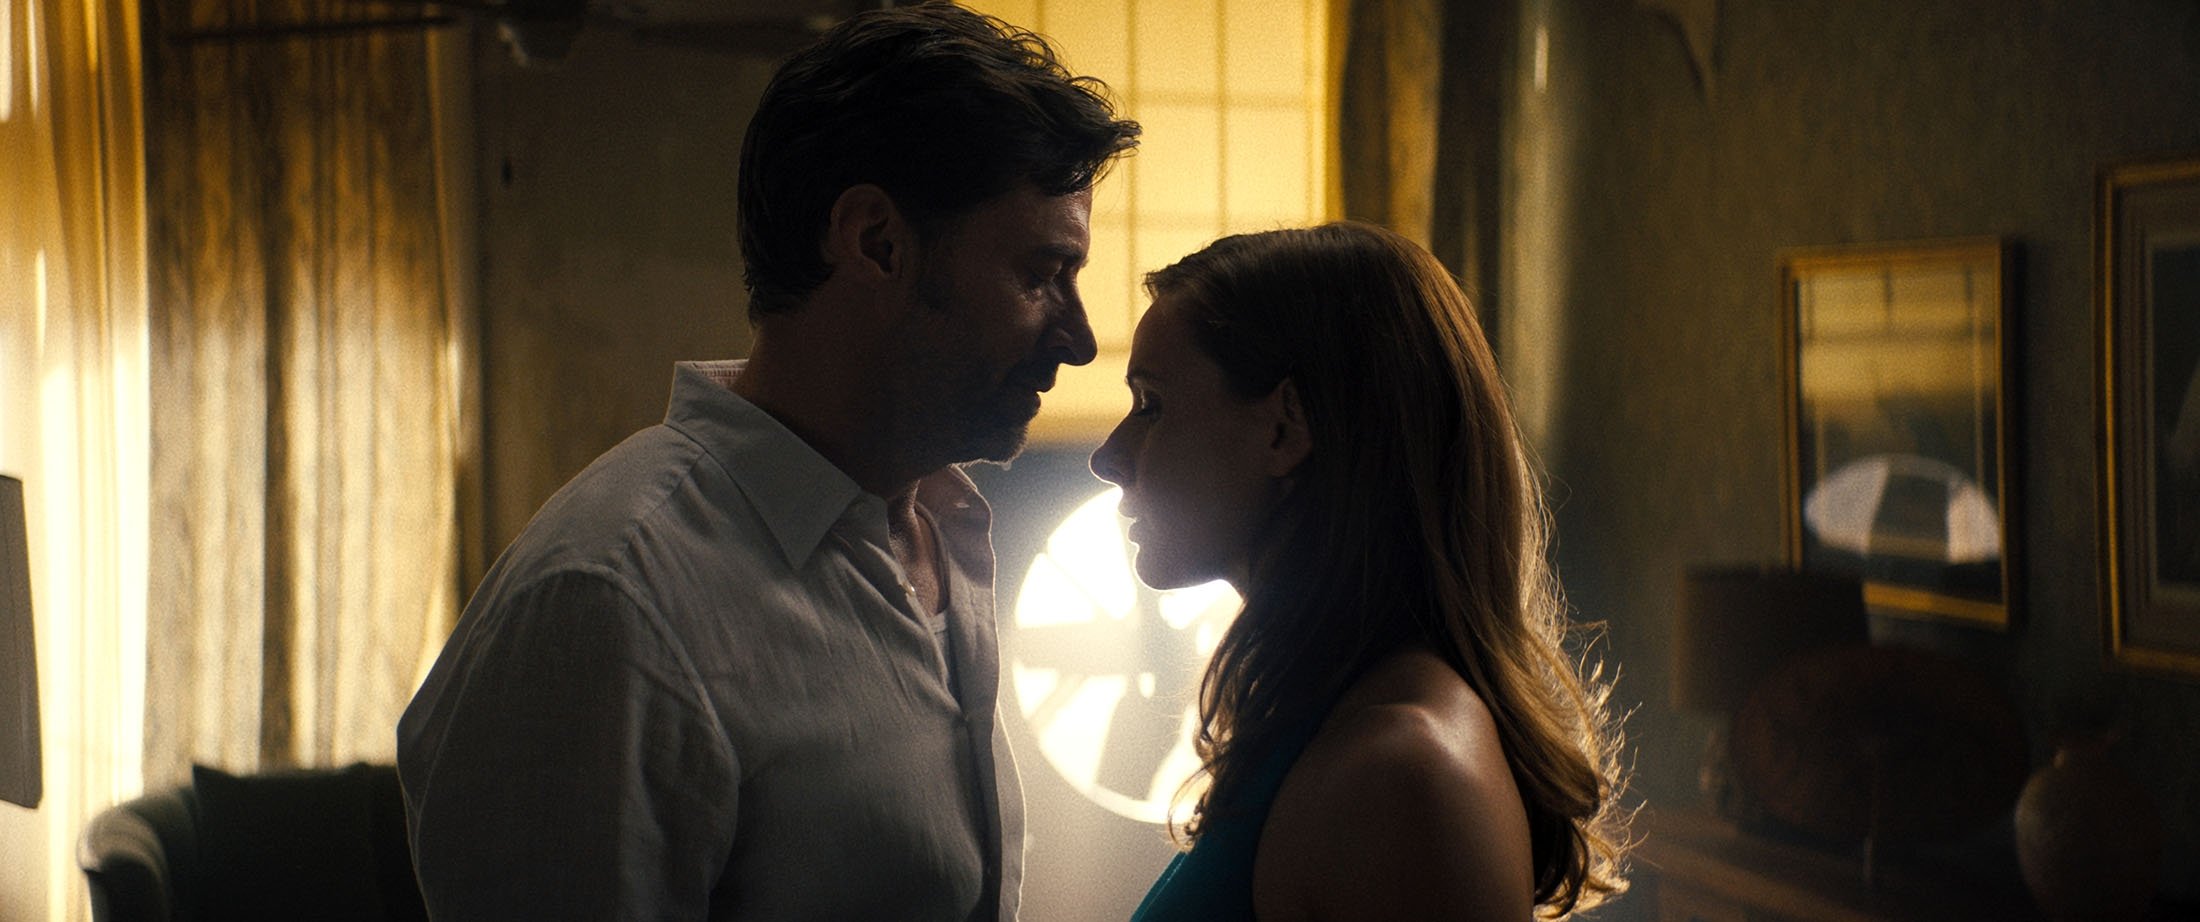 Hugh Jackman (L) and Rebecca Ferguson in a scene from the film "Reminiscence." (Warner Bros. Pictures via AP)